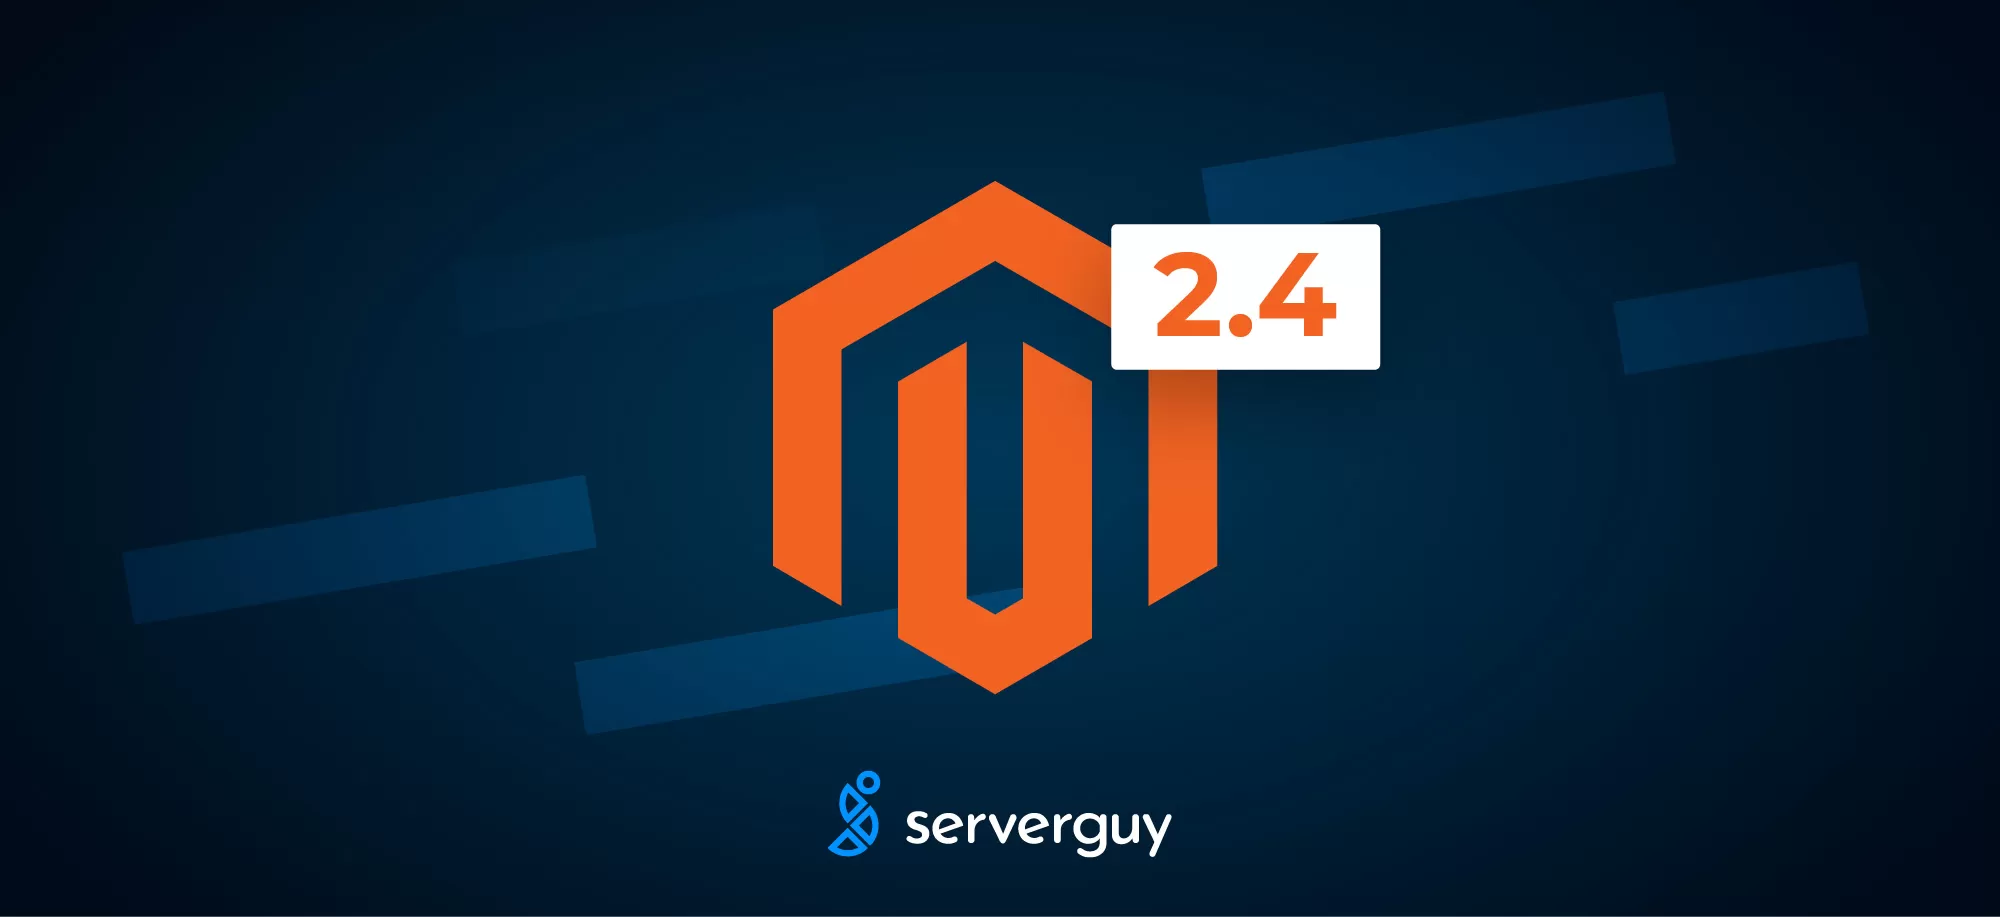 What's New in Magento 2.4: Top Features Explained